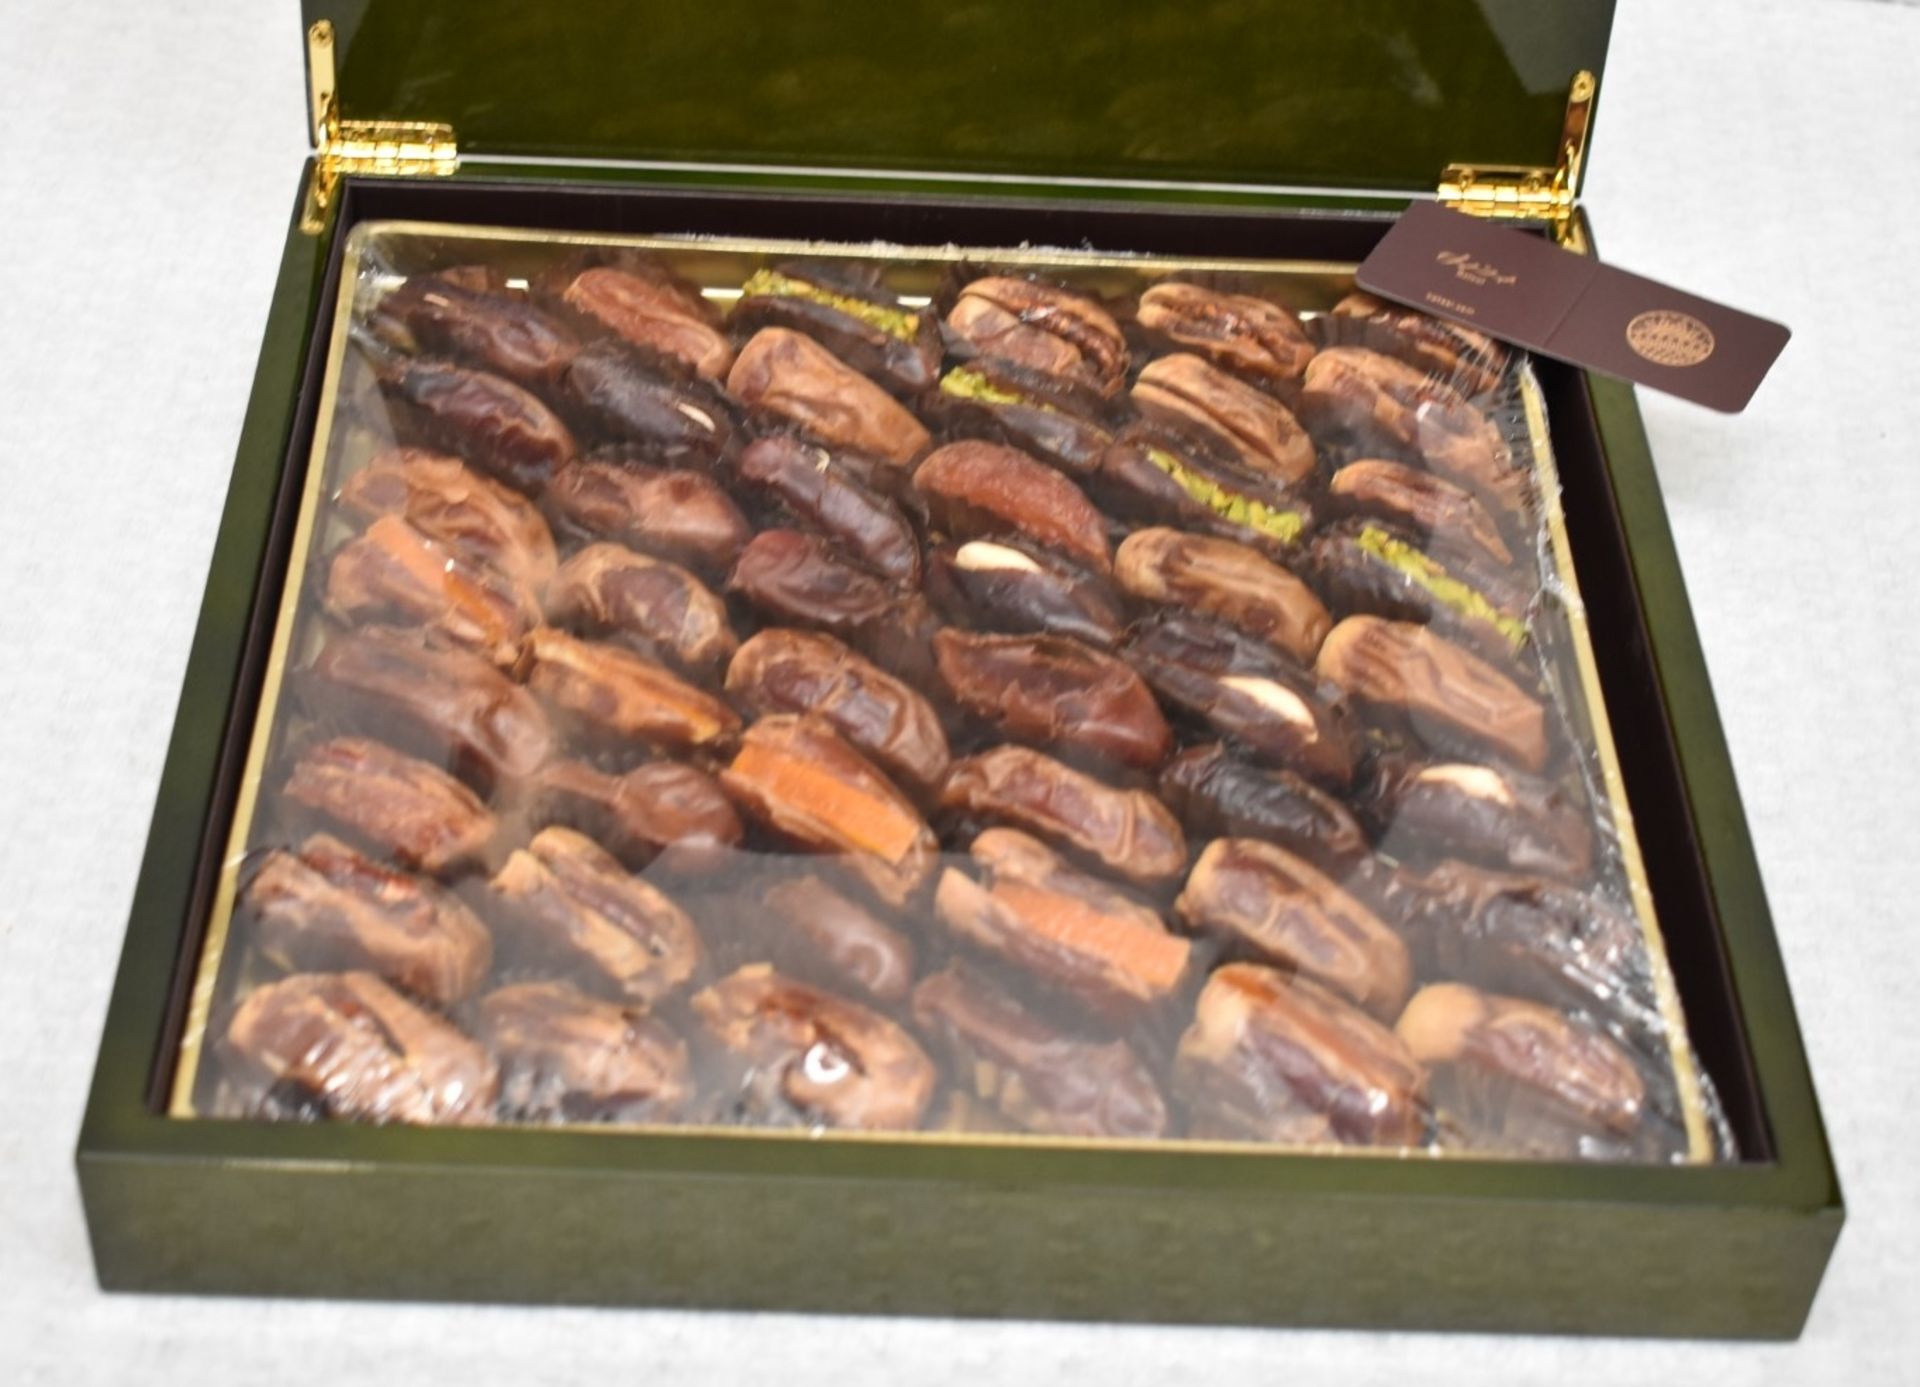 1 x BATEEL Assorted Luxury Filled Dates, 730g - RRP £129.99 - Presented In A Wooden Gift Box - Image 2 of 8